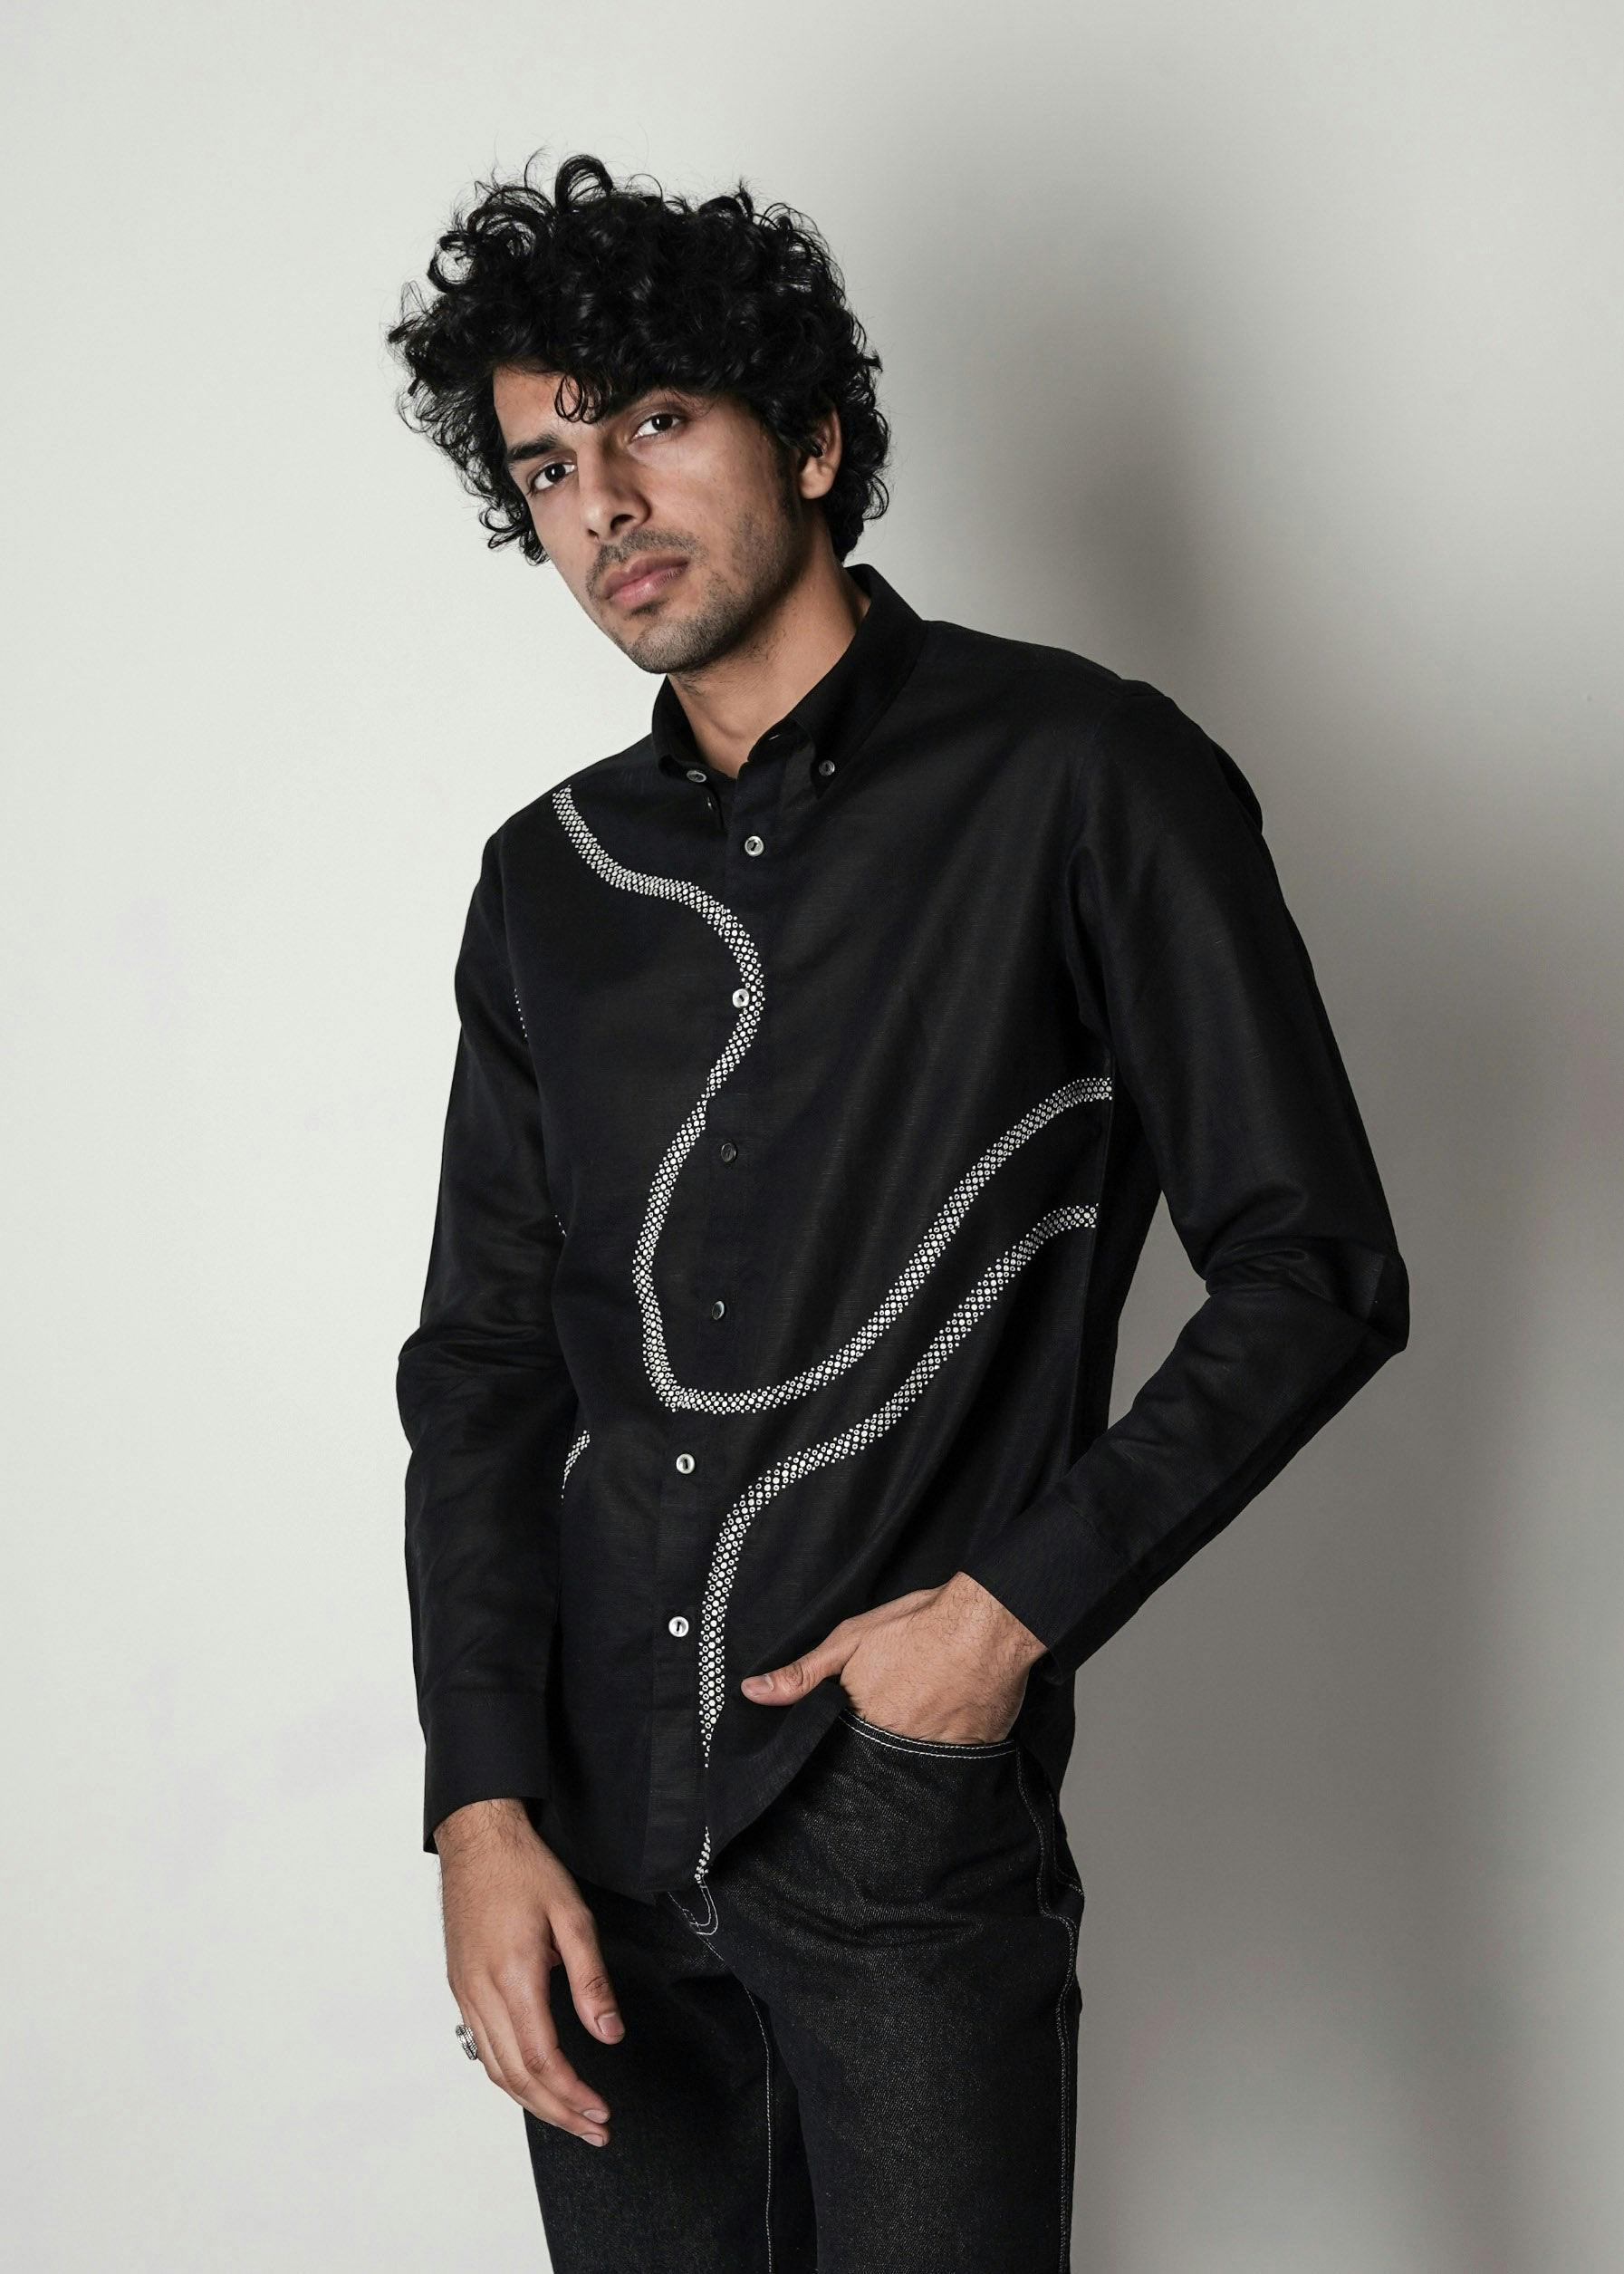 Coil Hand Embroidered Shirt, a product by Country Made